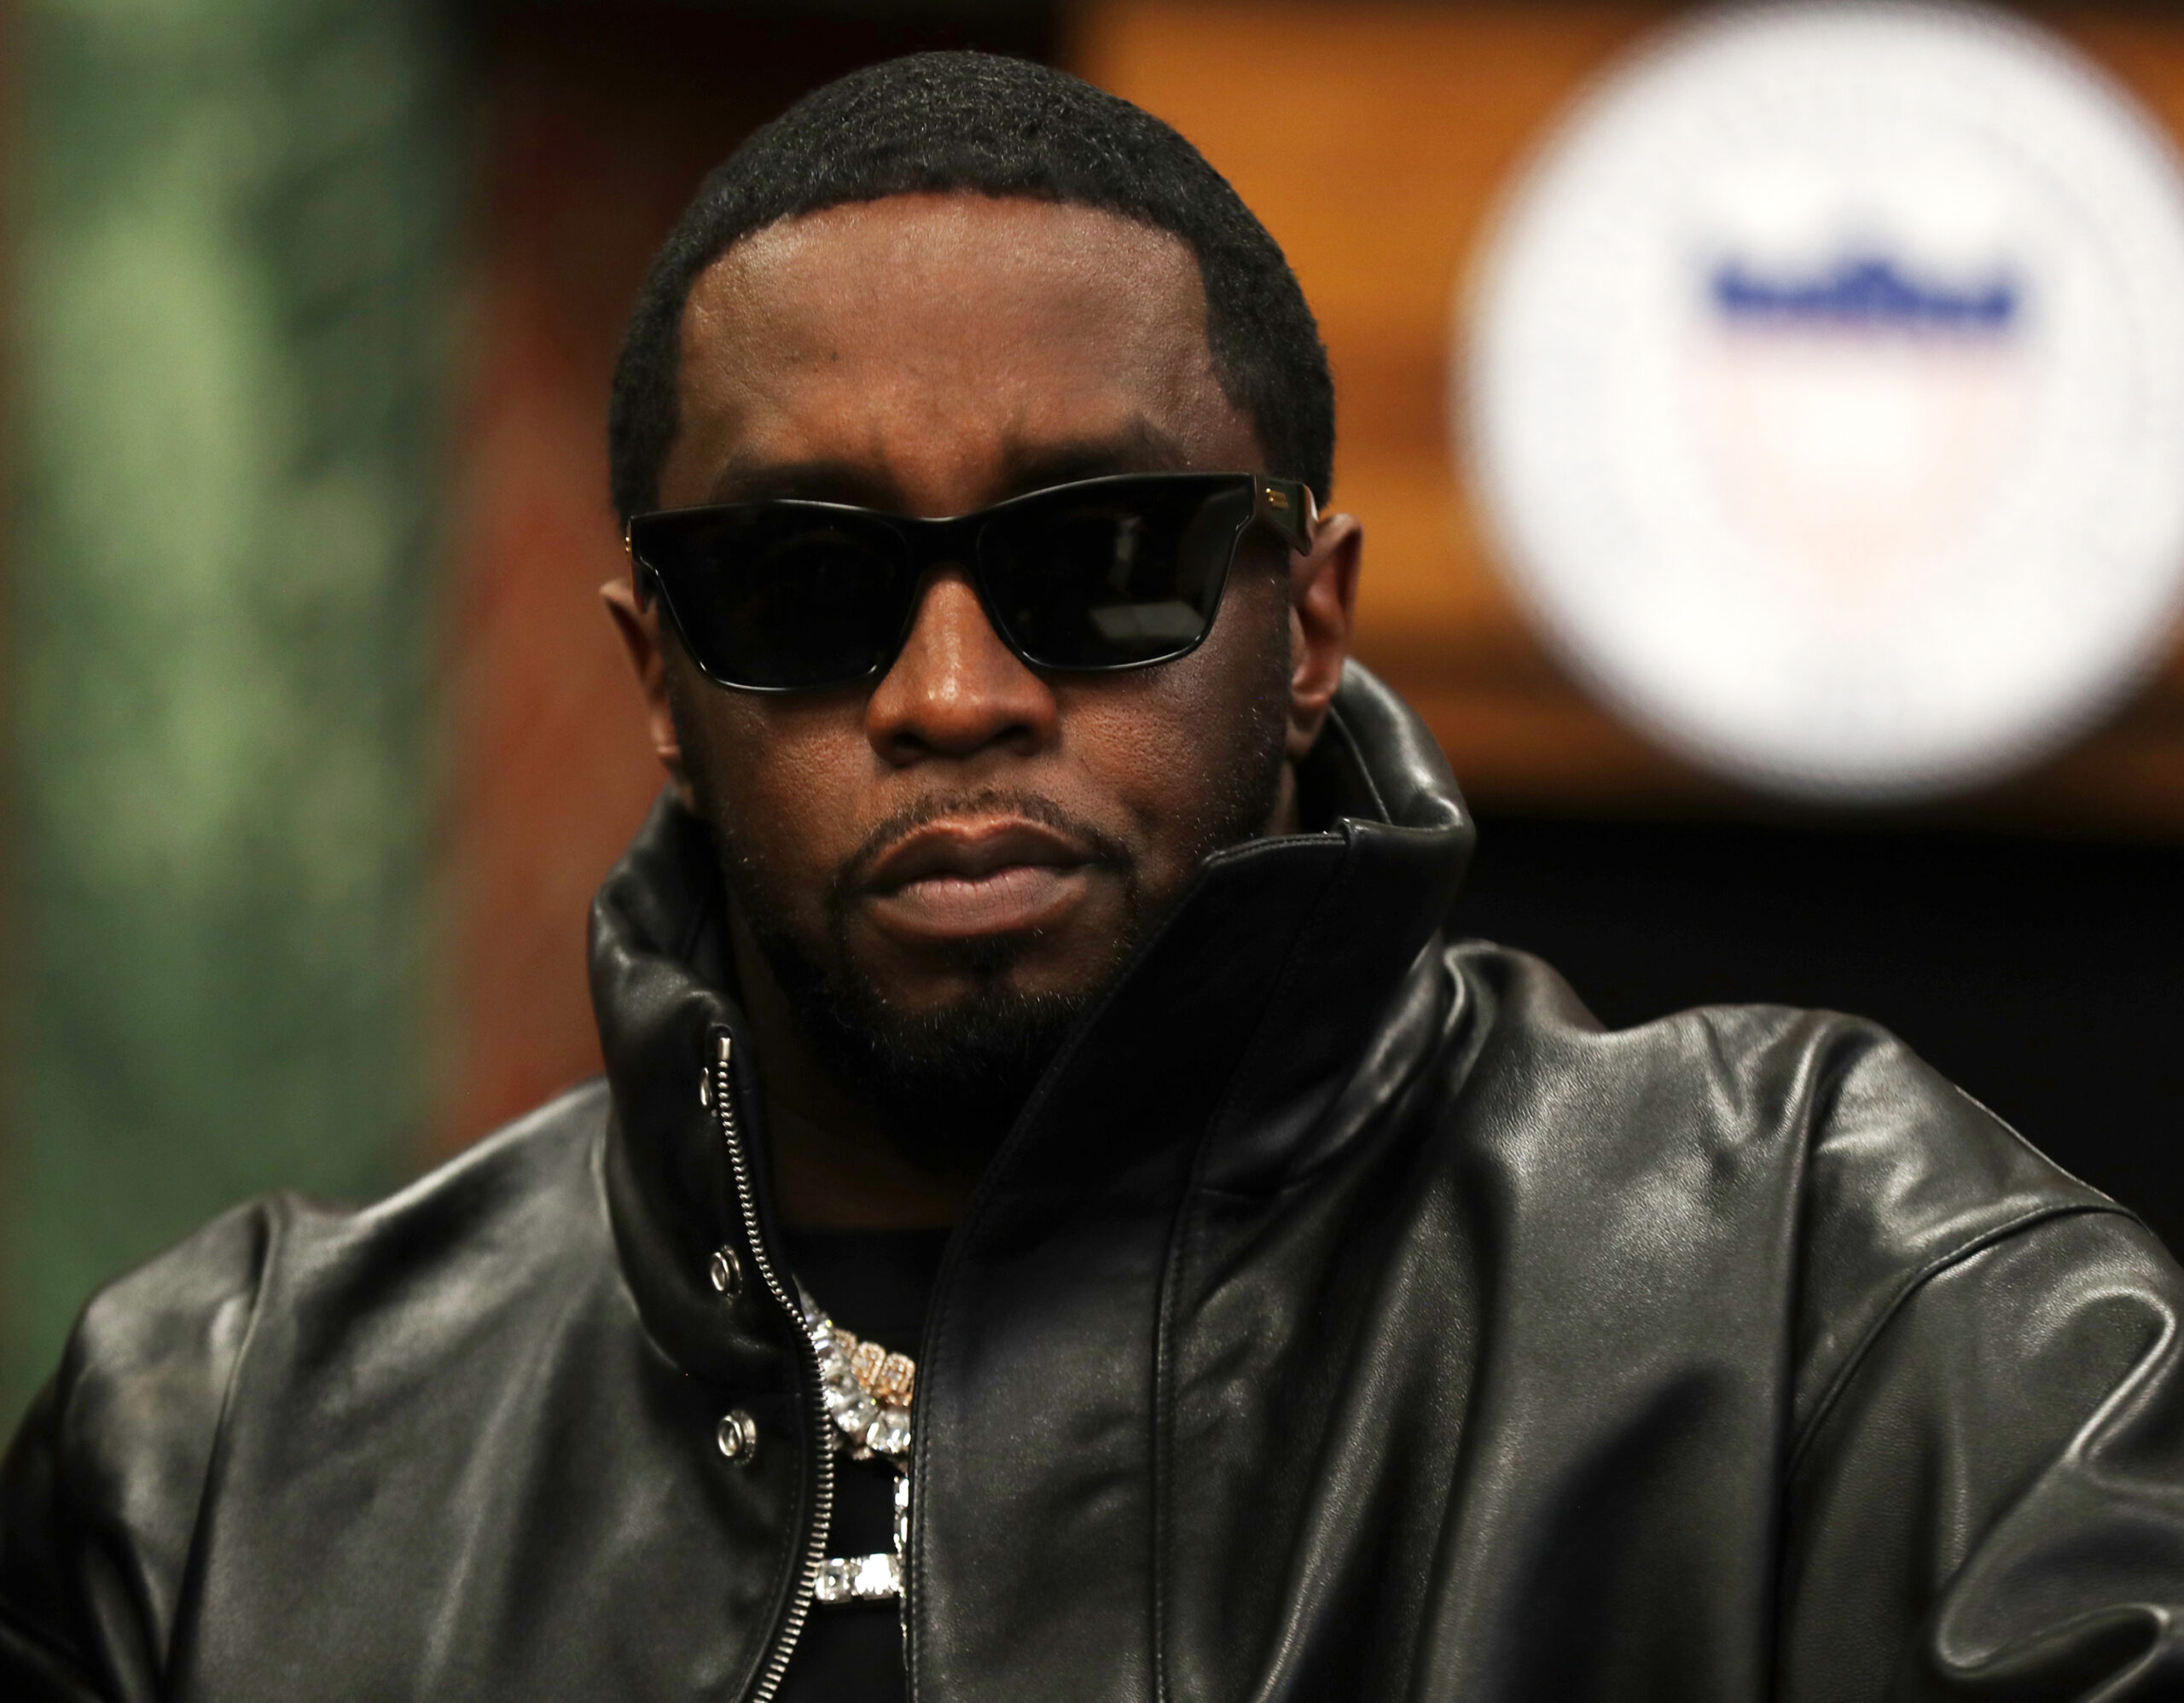 Diddy's "Controversial" Private Footage Is Allegedly Being Sold As An NFT